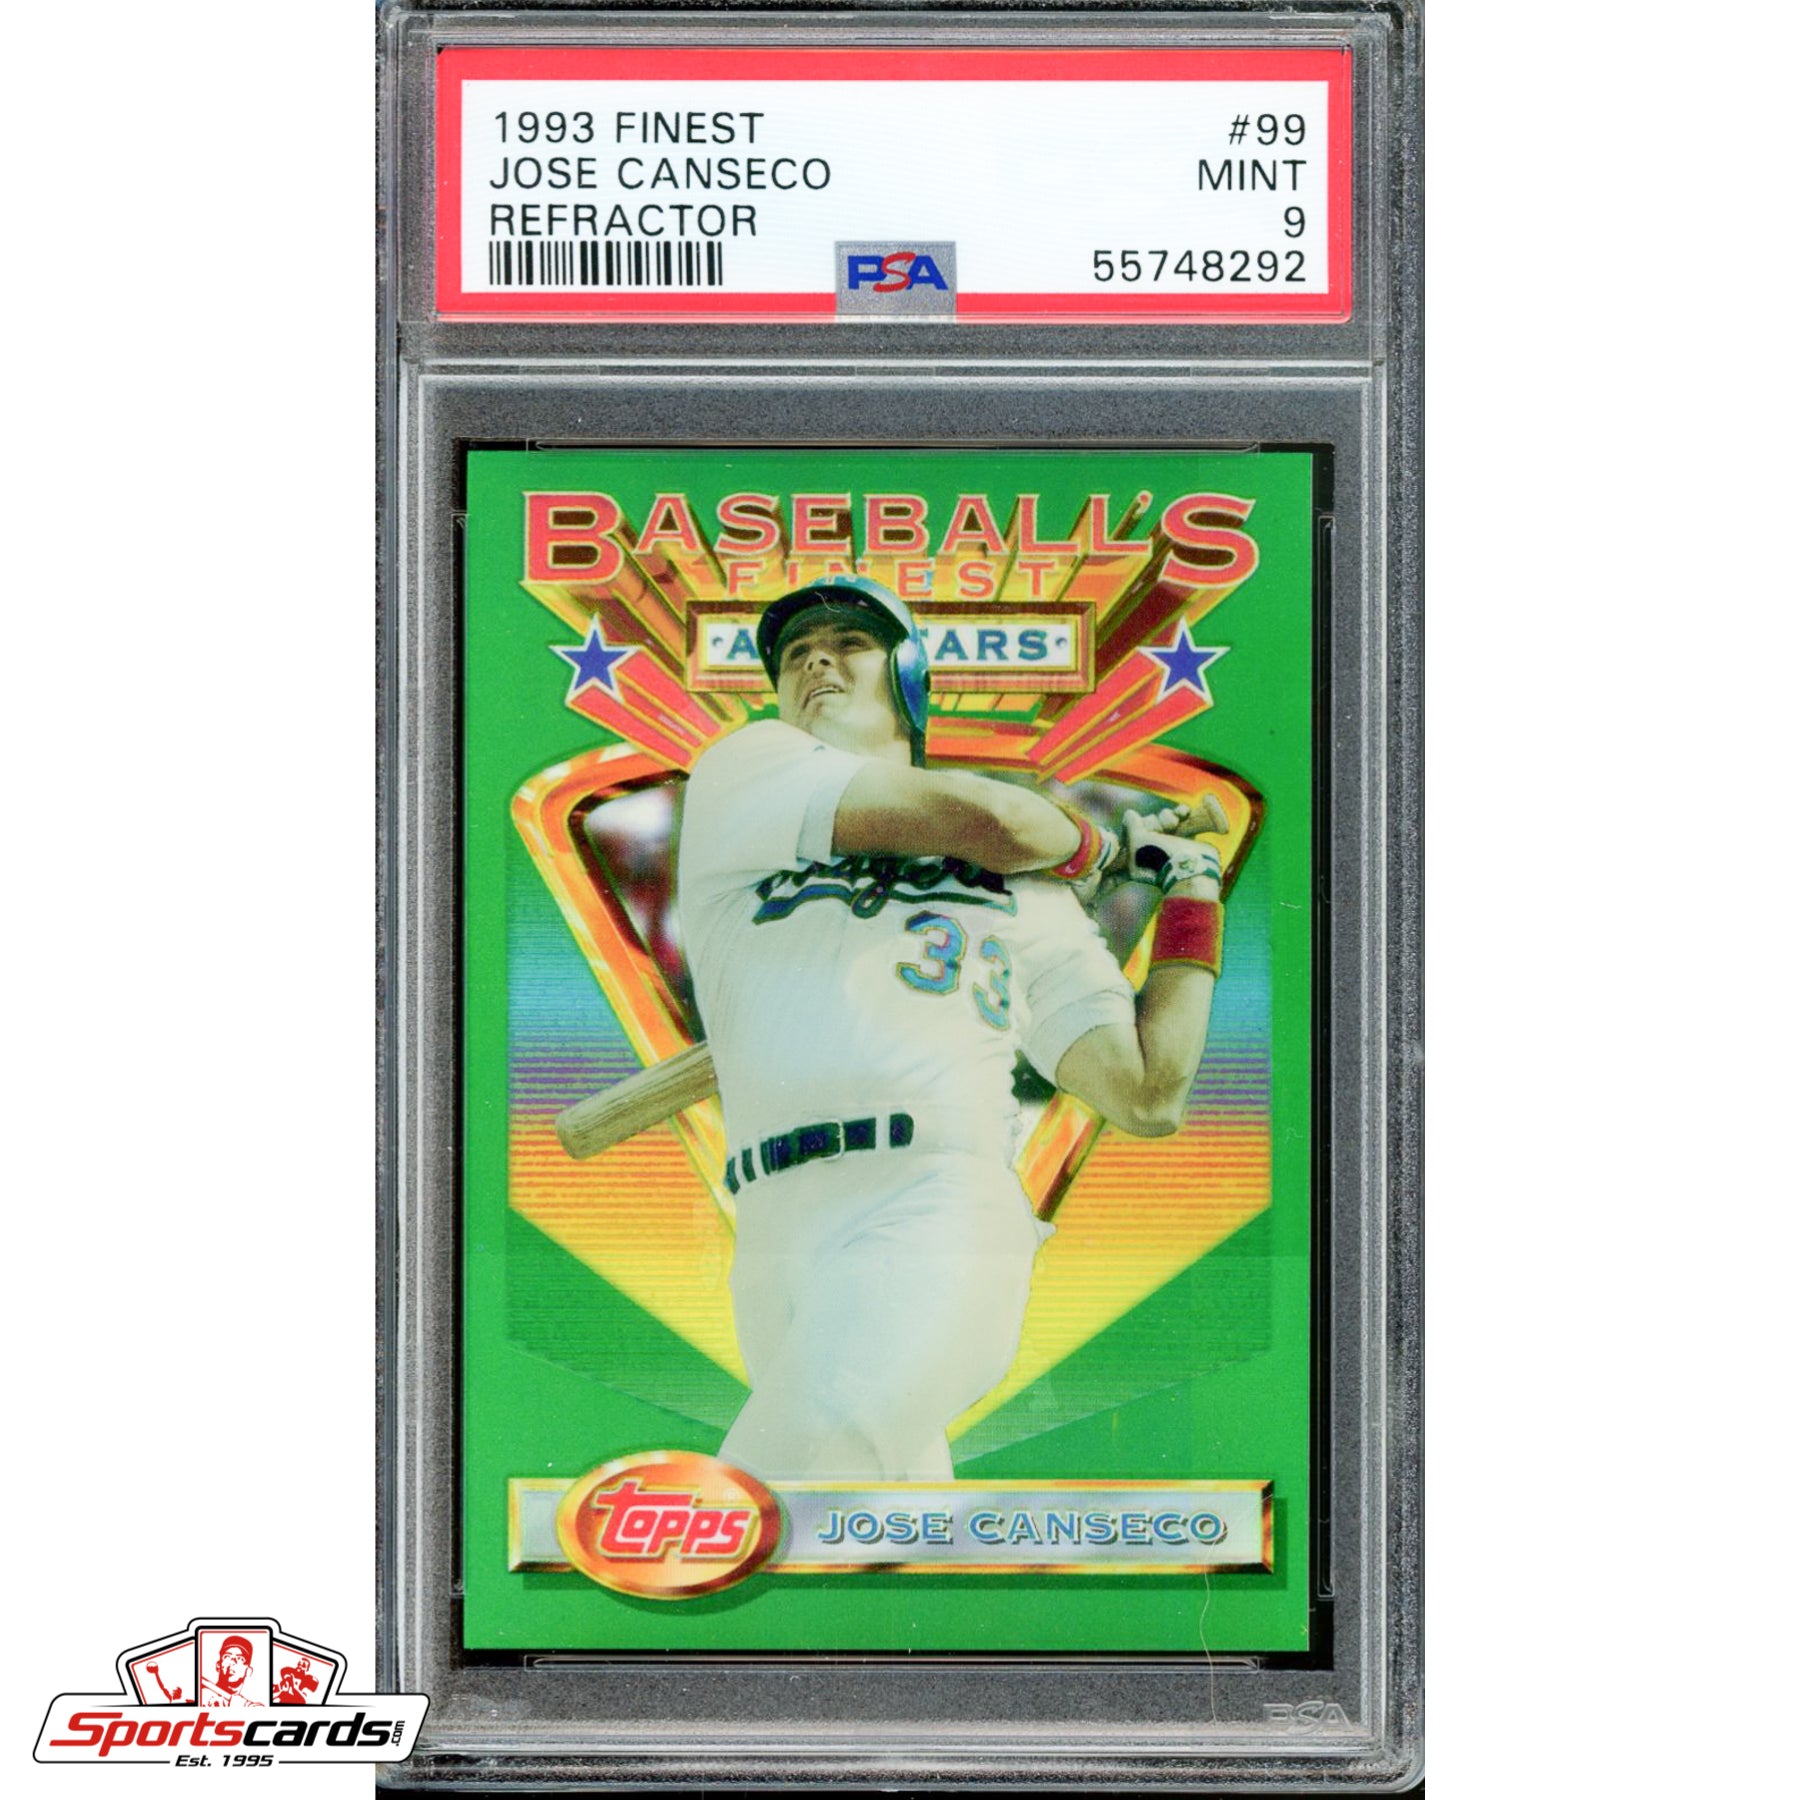 1993 Finest Jose Canseco Refractor #99 PSA 9